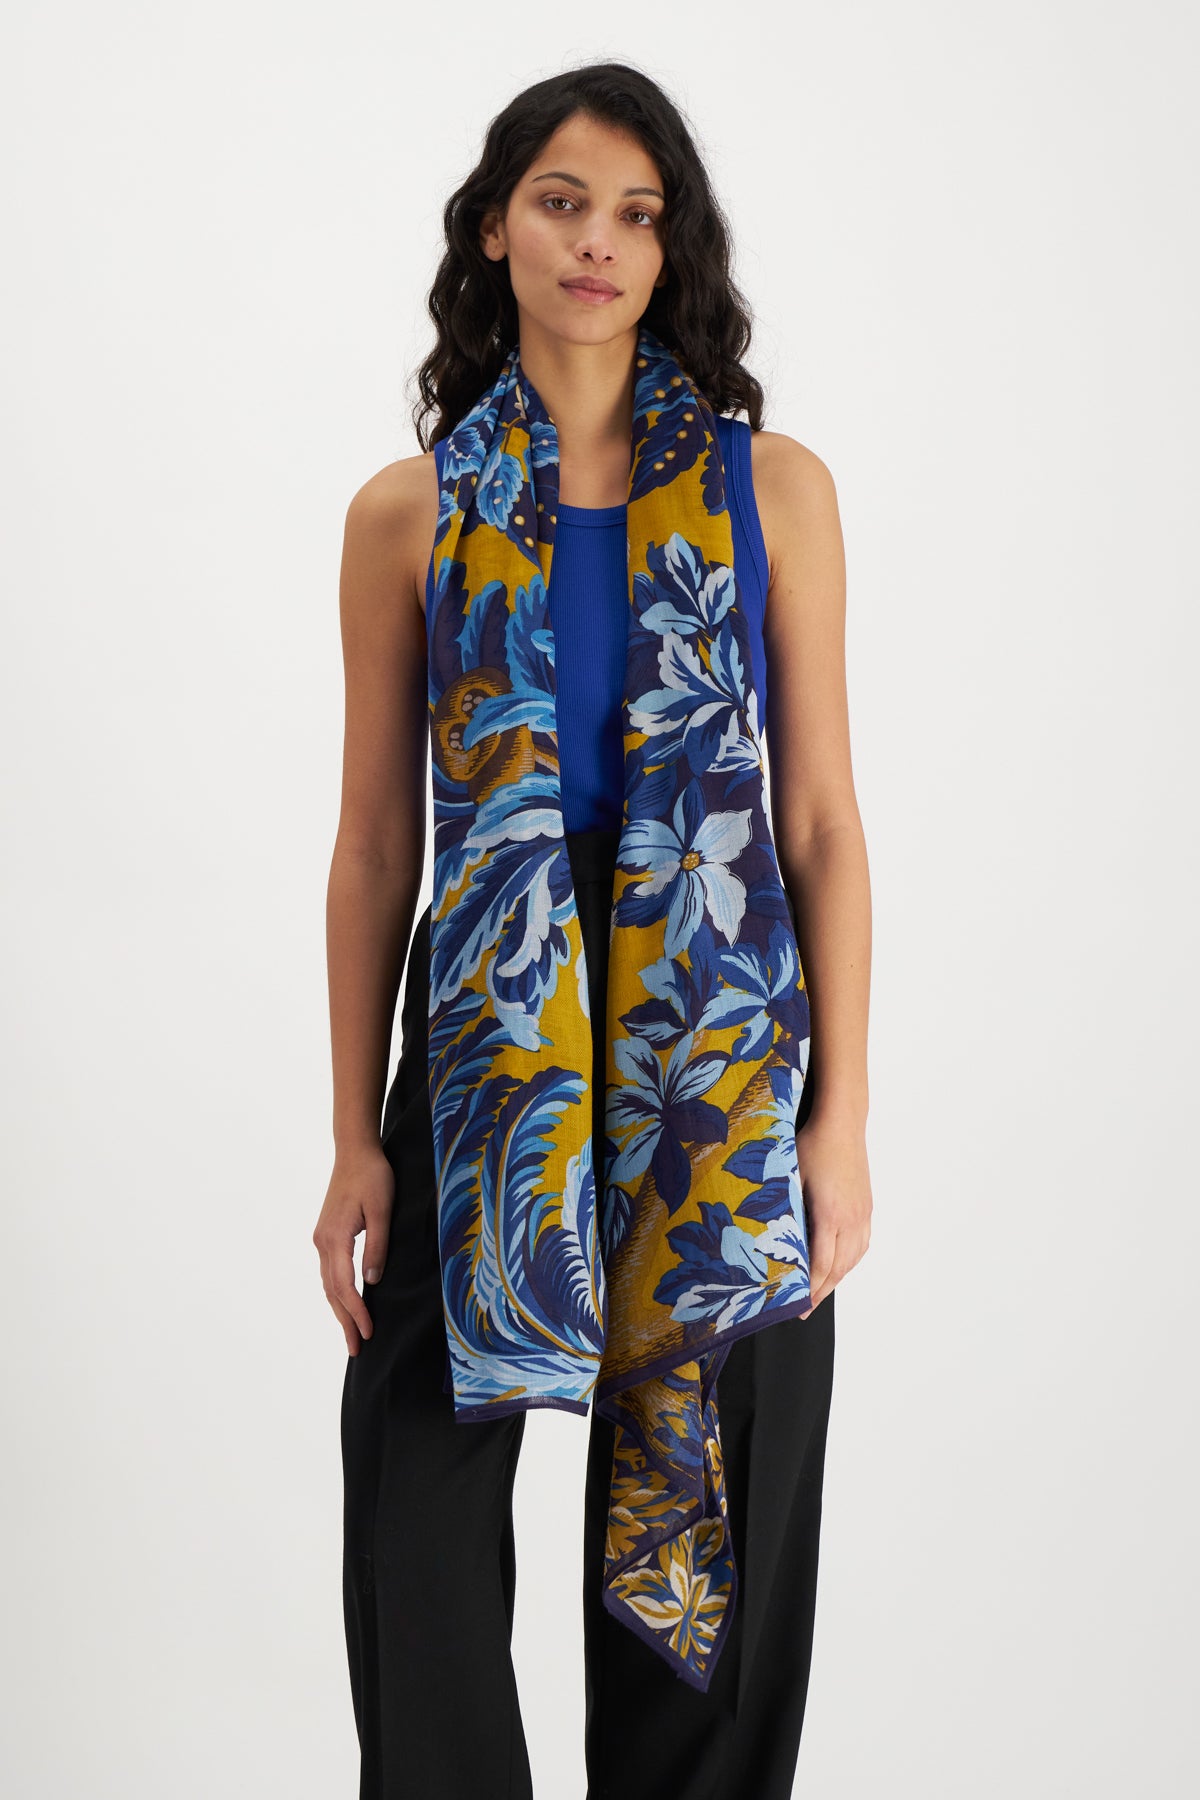 Chatou Winter Duck Blue Scarf